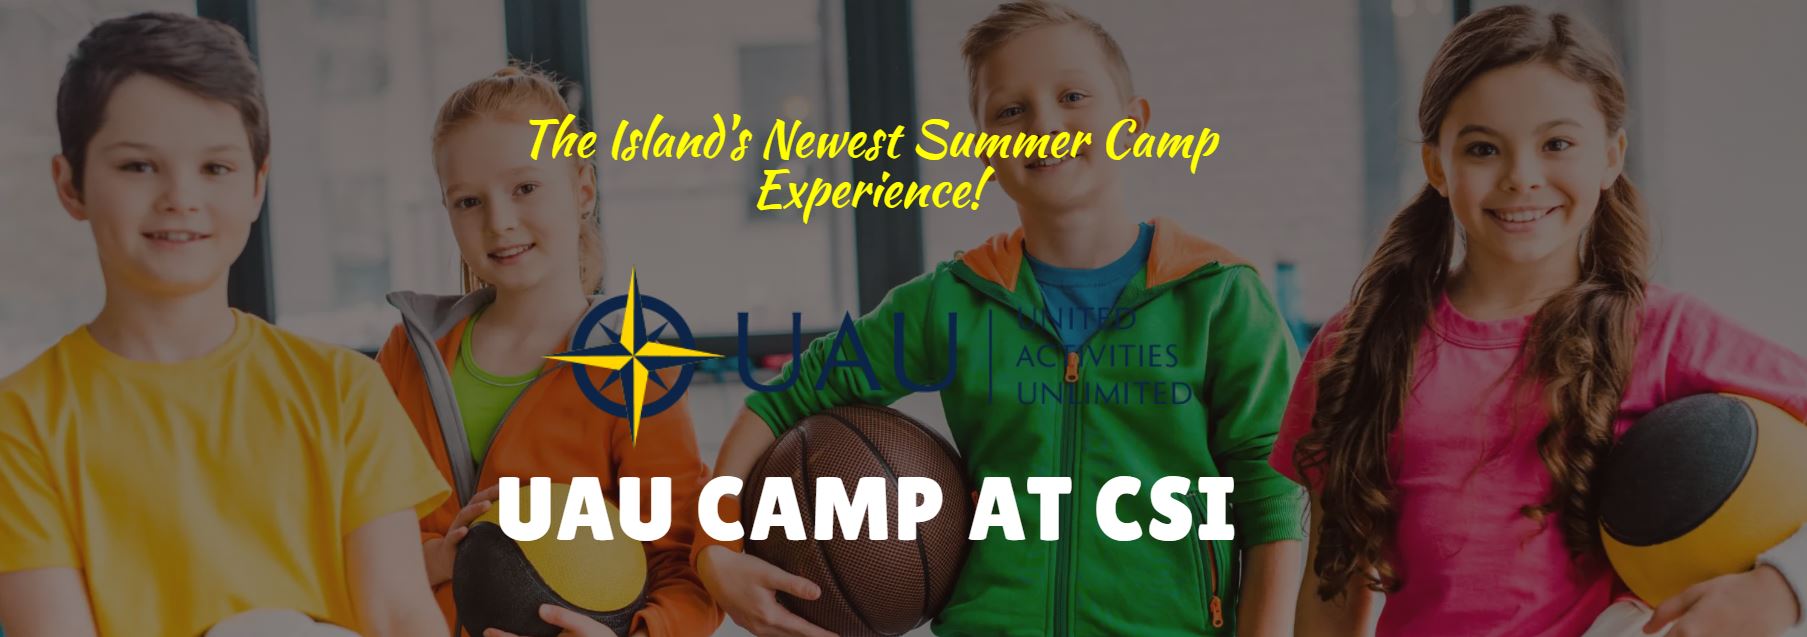 The Island's Newest Summer Camp UAU at The College of Staten Island